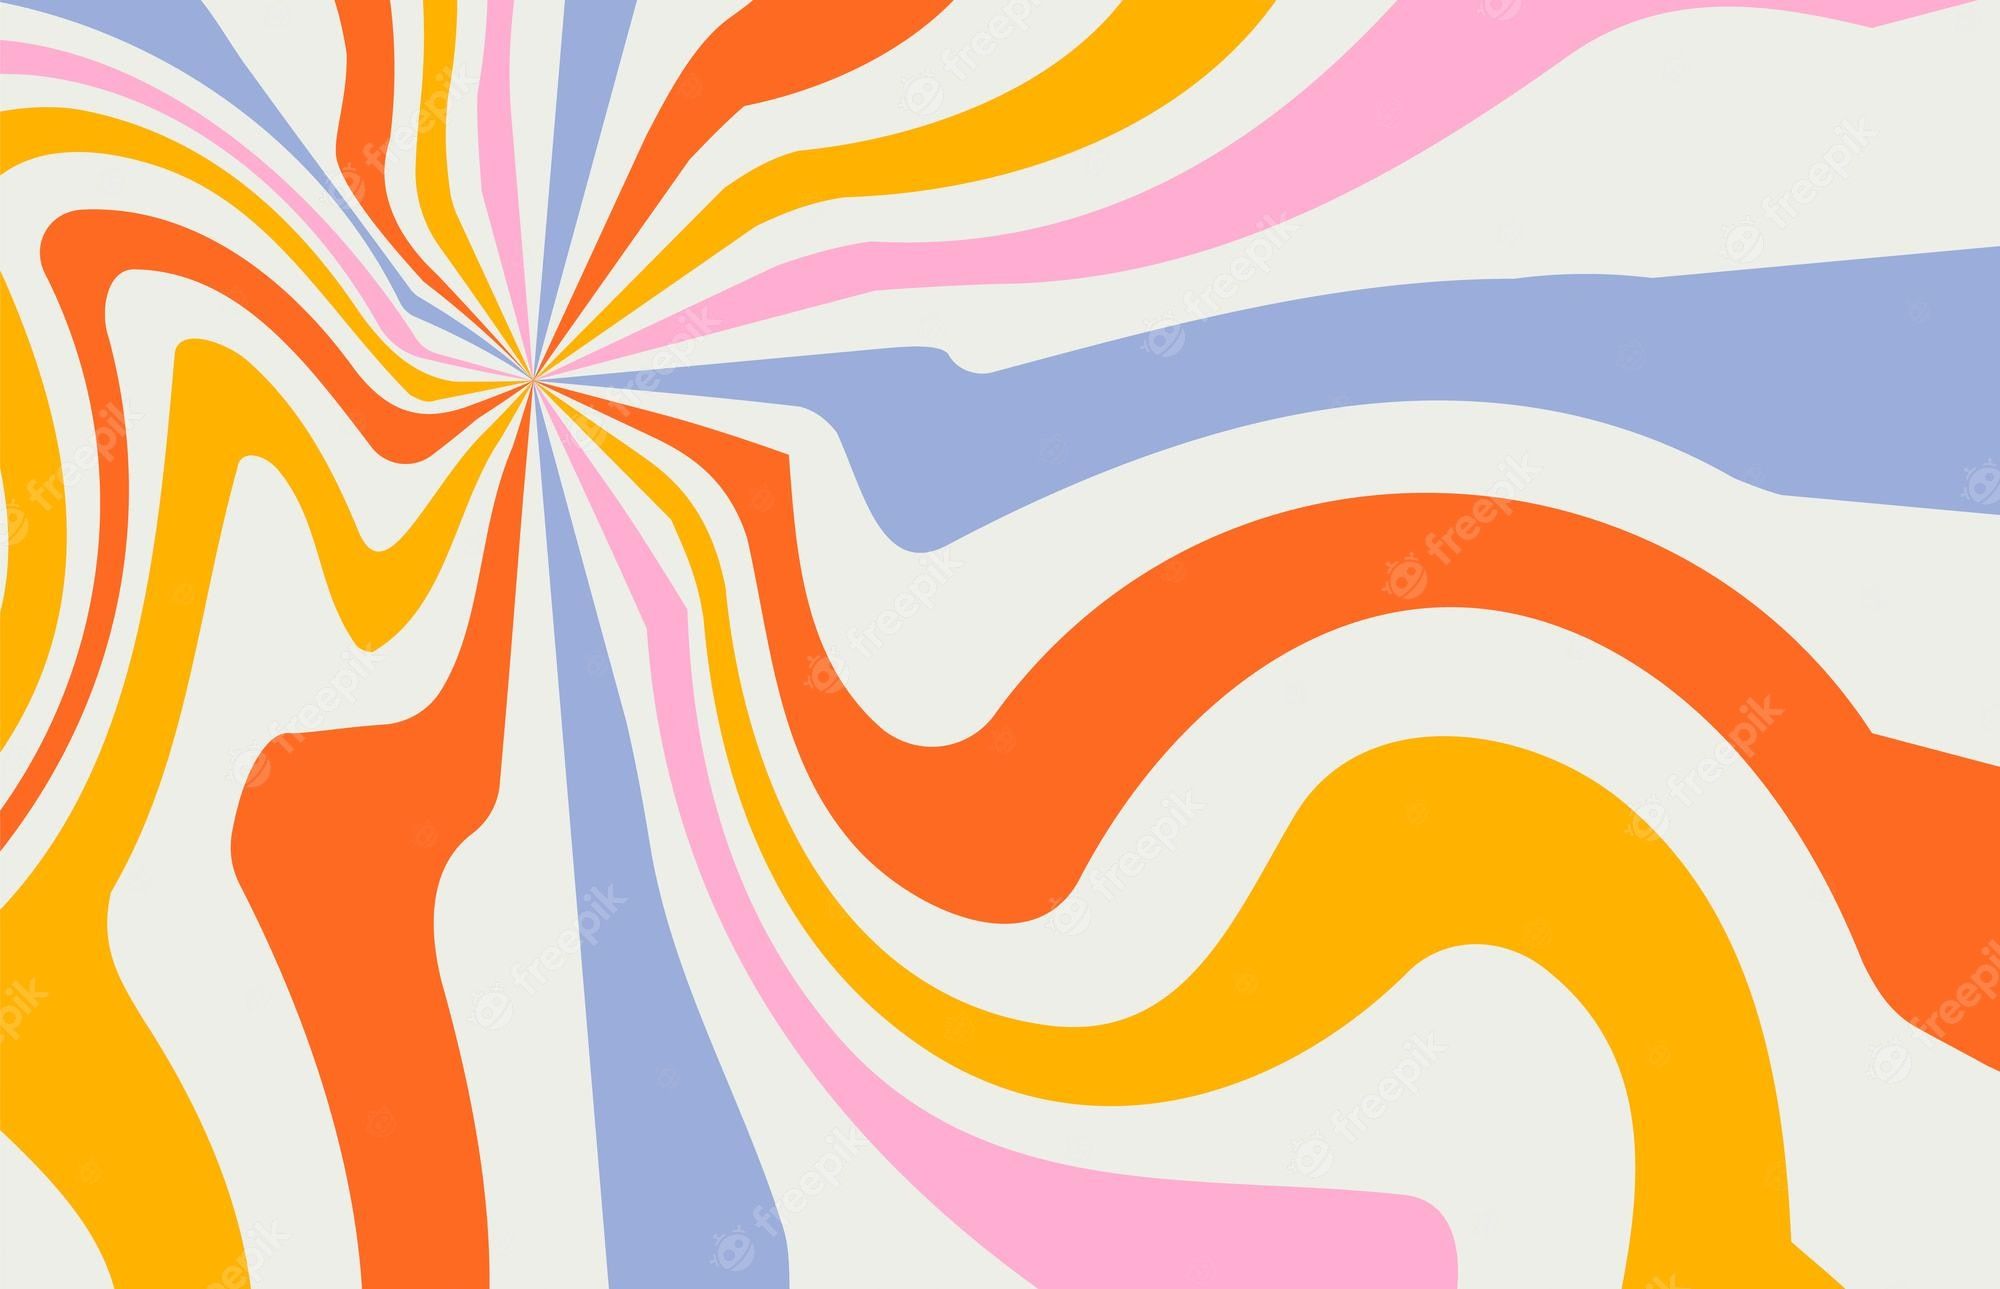 Groovy retro background in 60s 70s style. Colorful swirls and stripes. Vector illustration - 60s